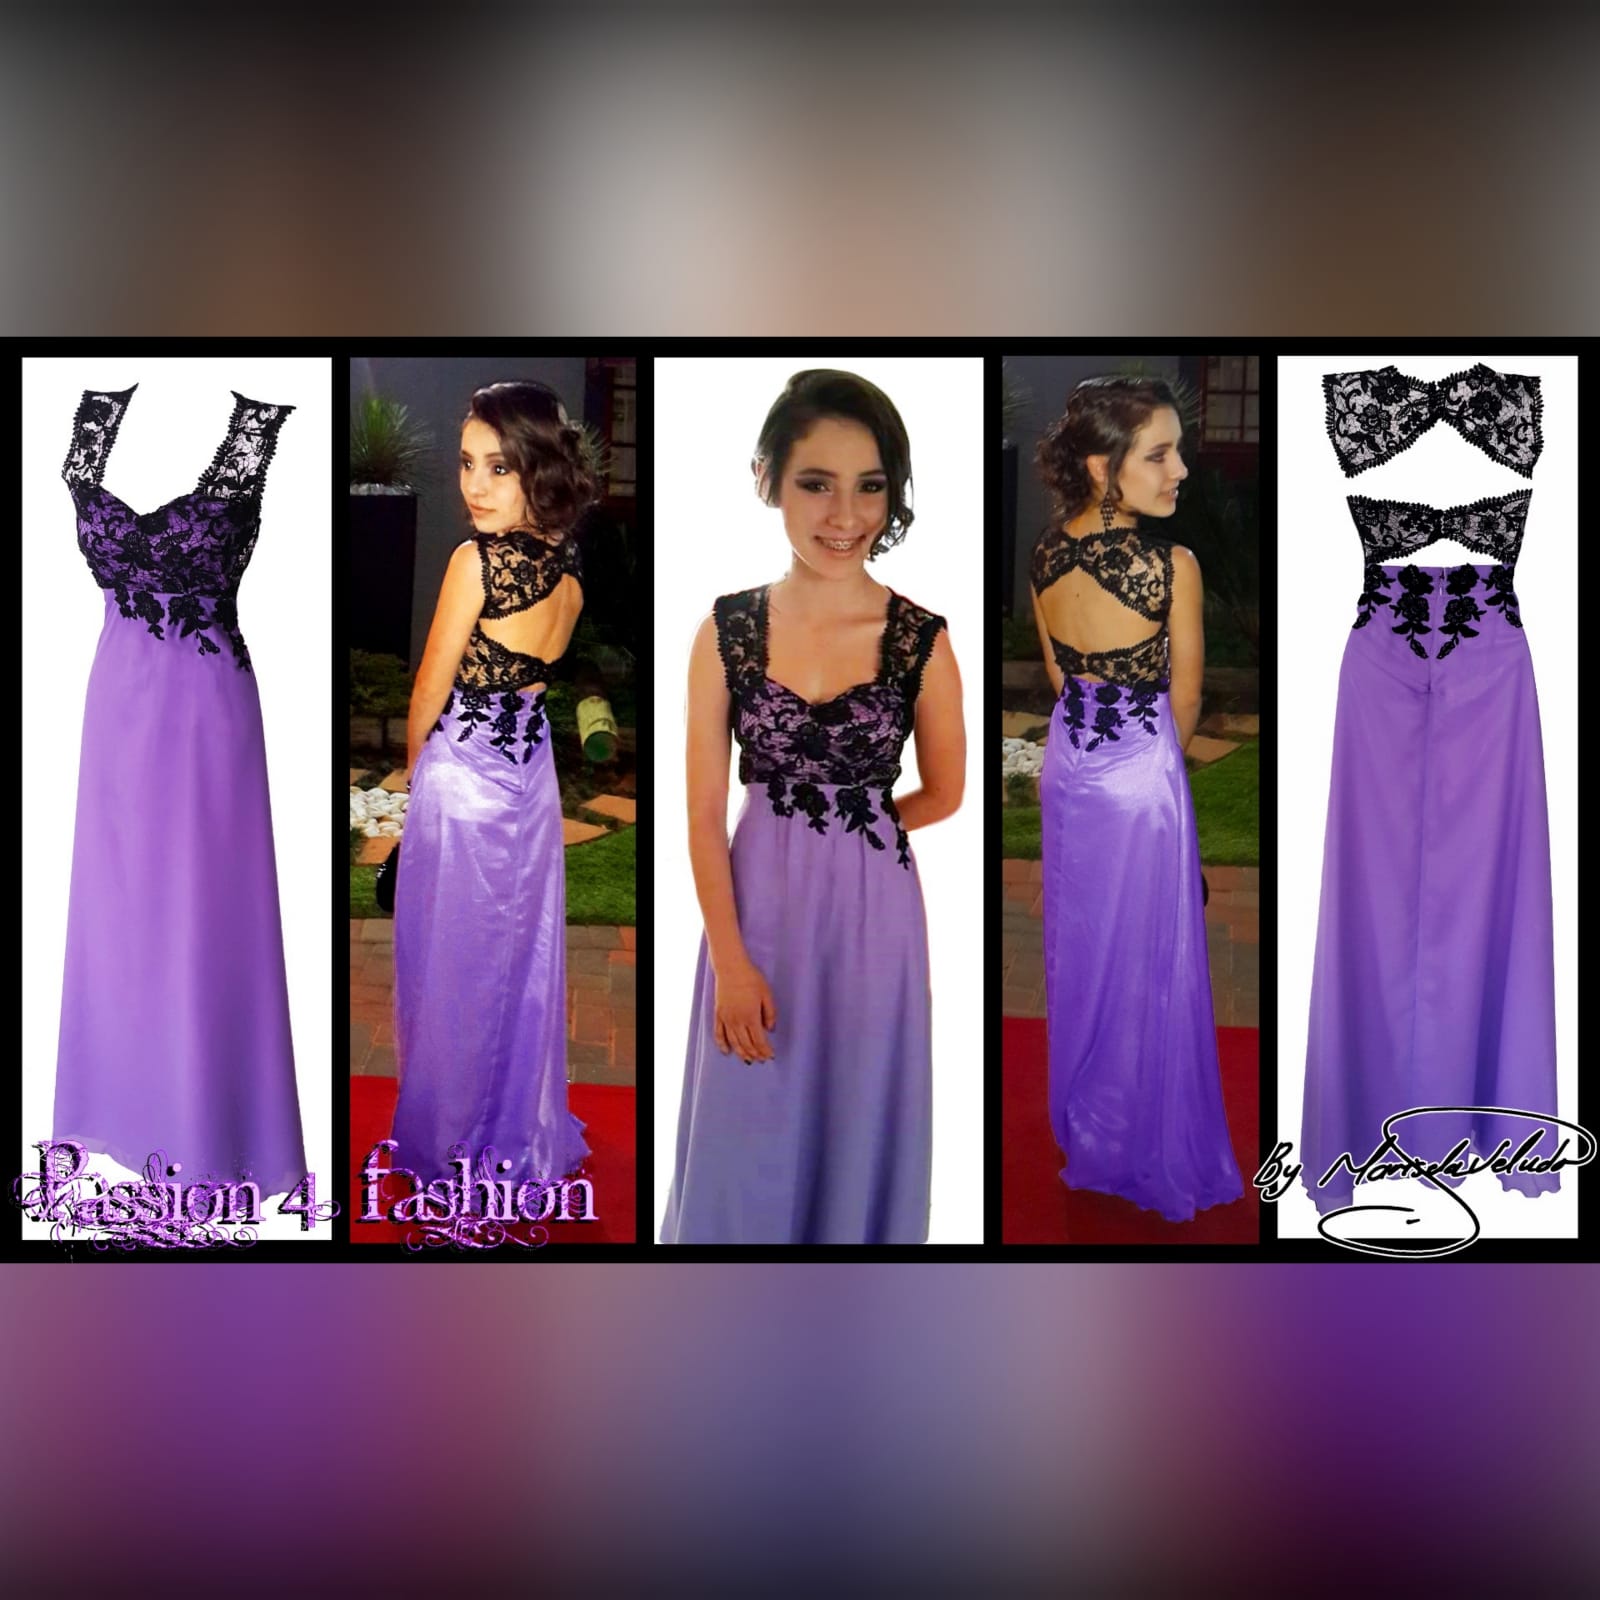 Lilac and black lace prom dress 4 lilac and black lace prom dress. Bodice with applique lace and a sweetheart neckline. With sheer lace shoulder straps and sheer lace on the back. Long and flowy prom dress.